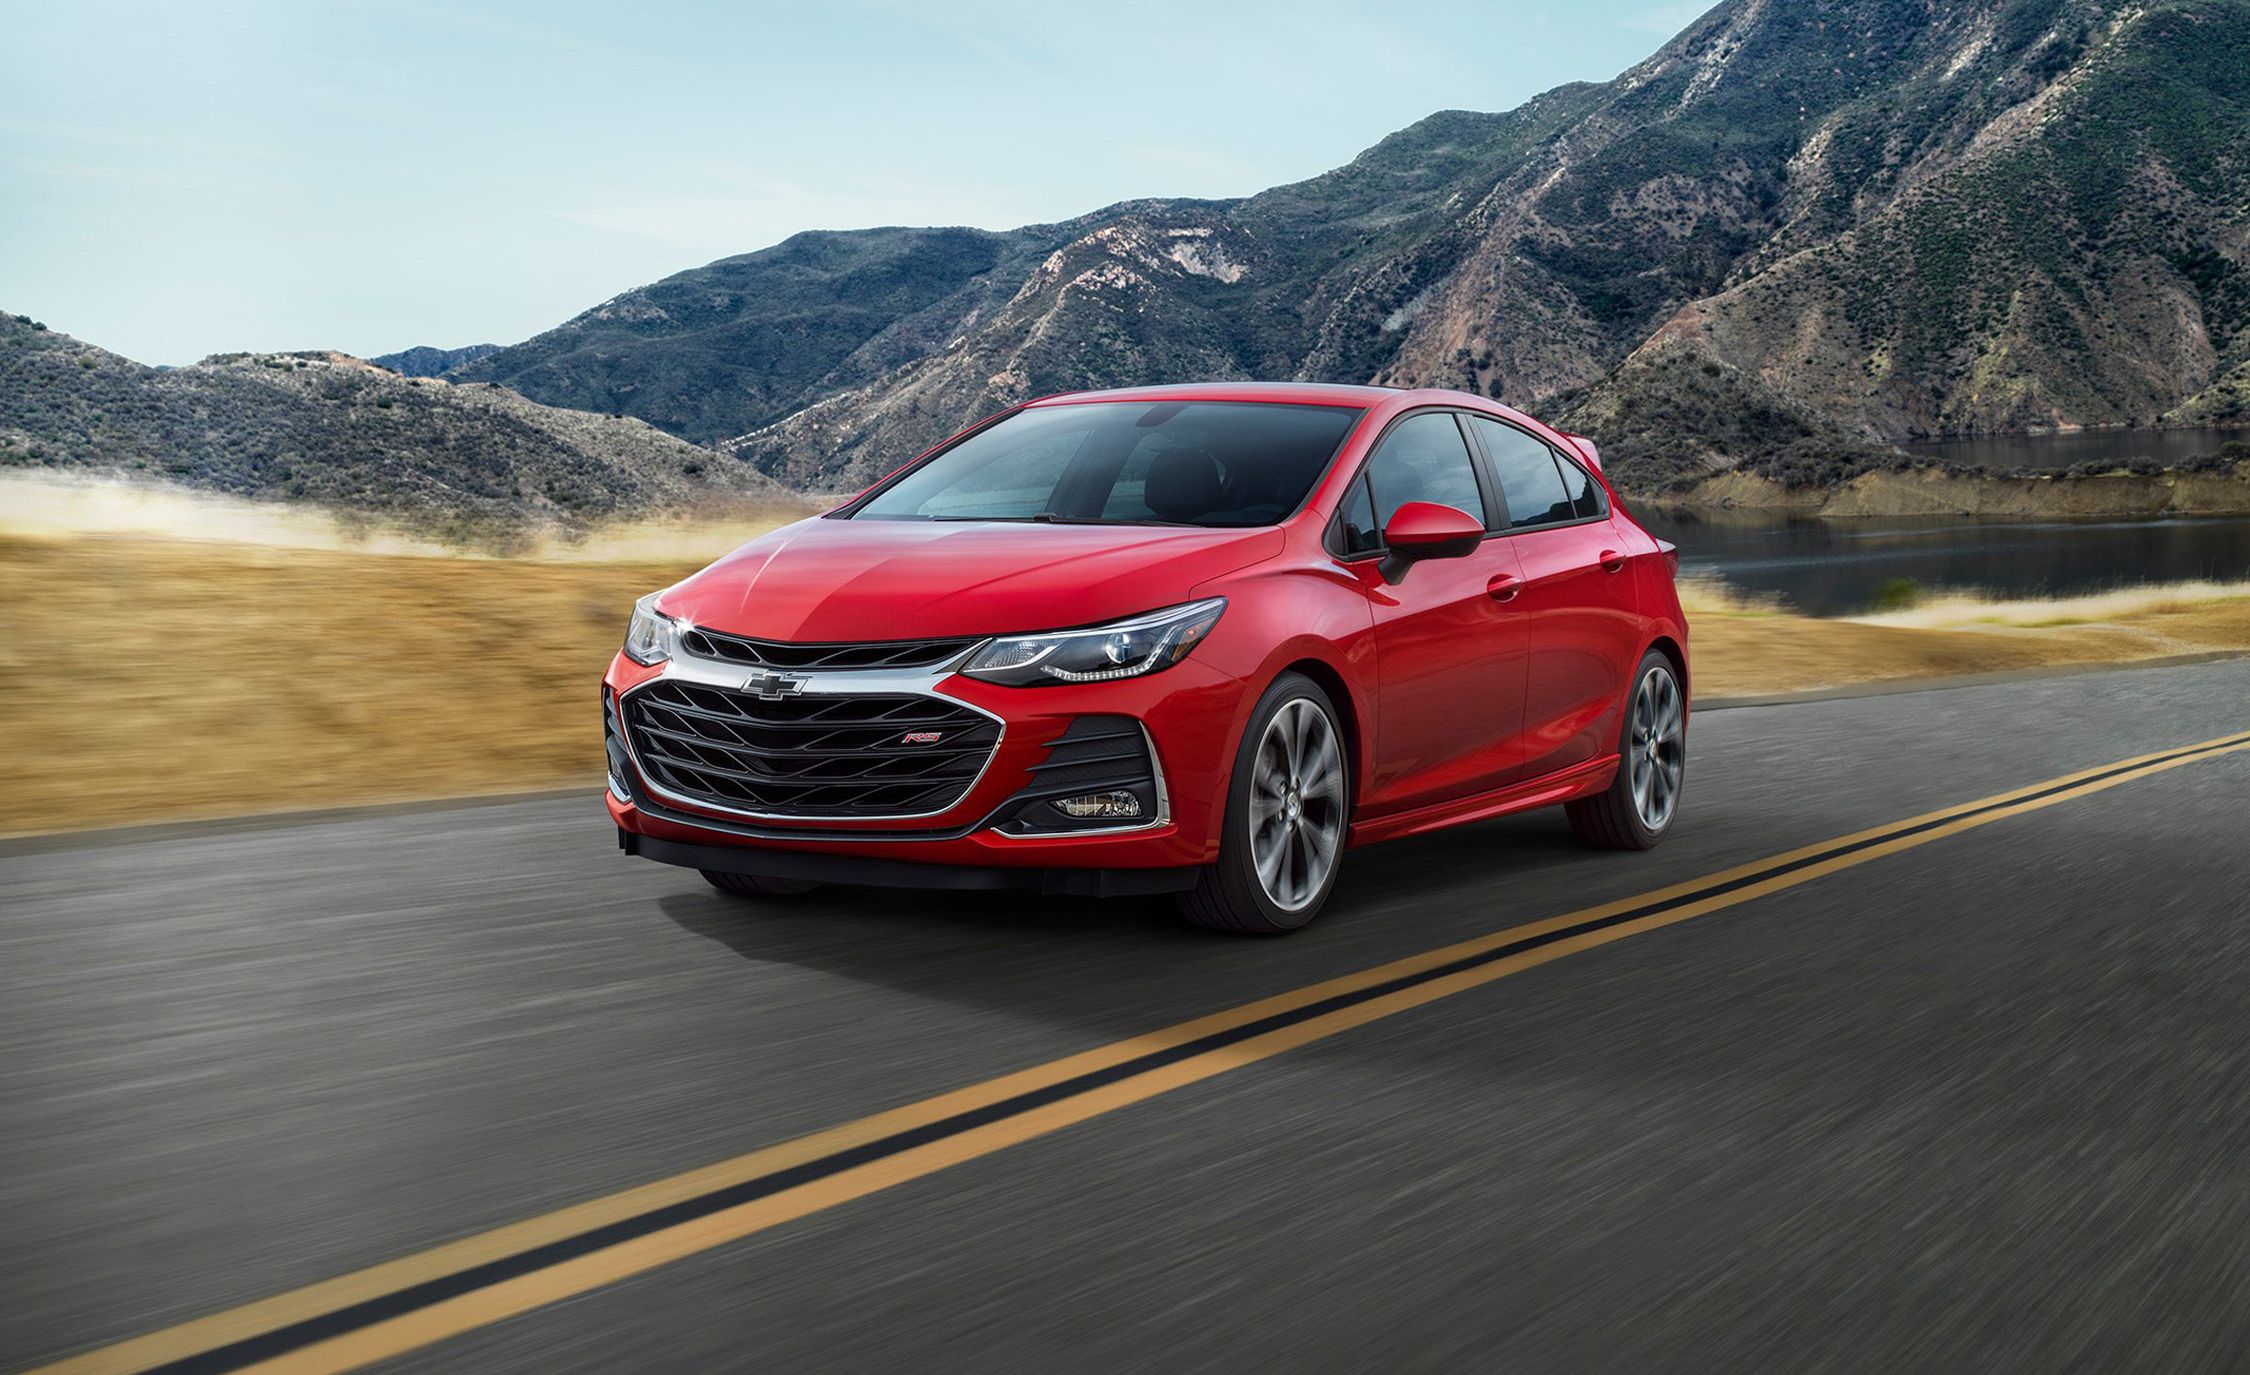 2019 Chevrolet Cruze Review, Pricing, and Specs